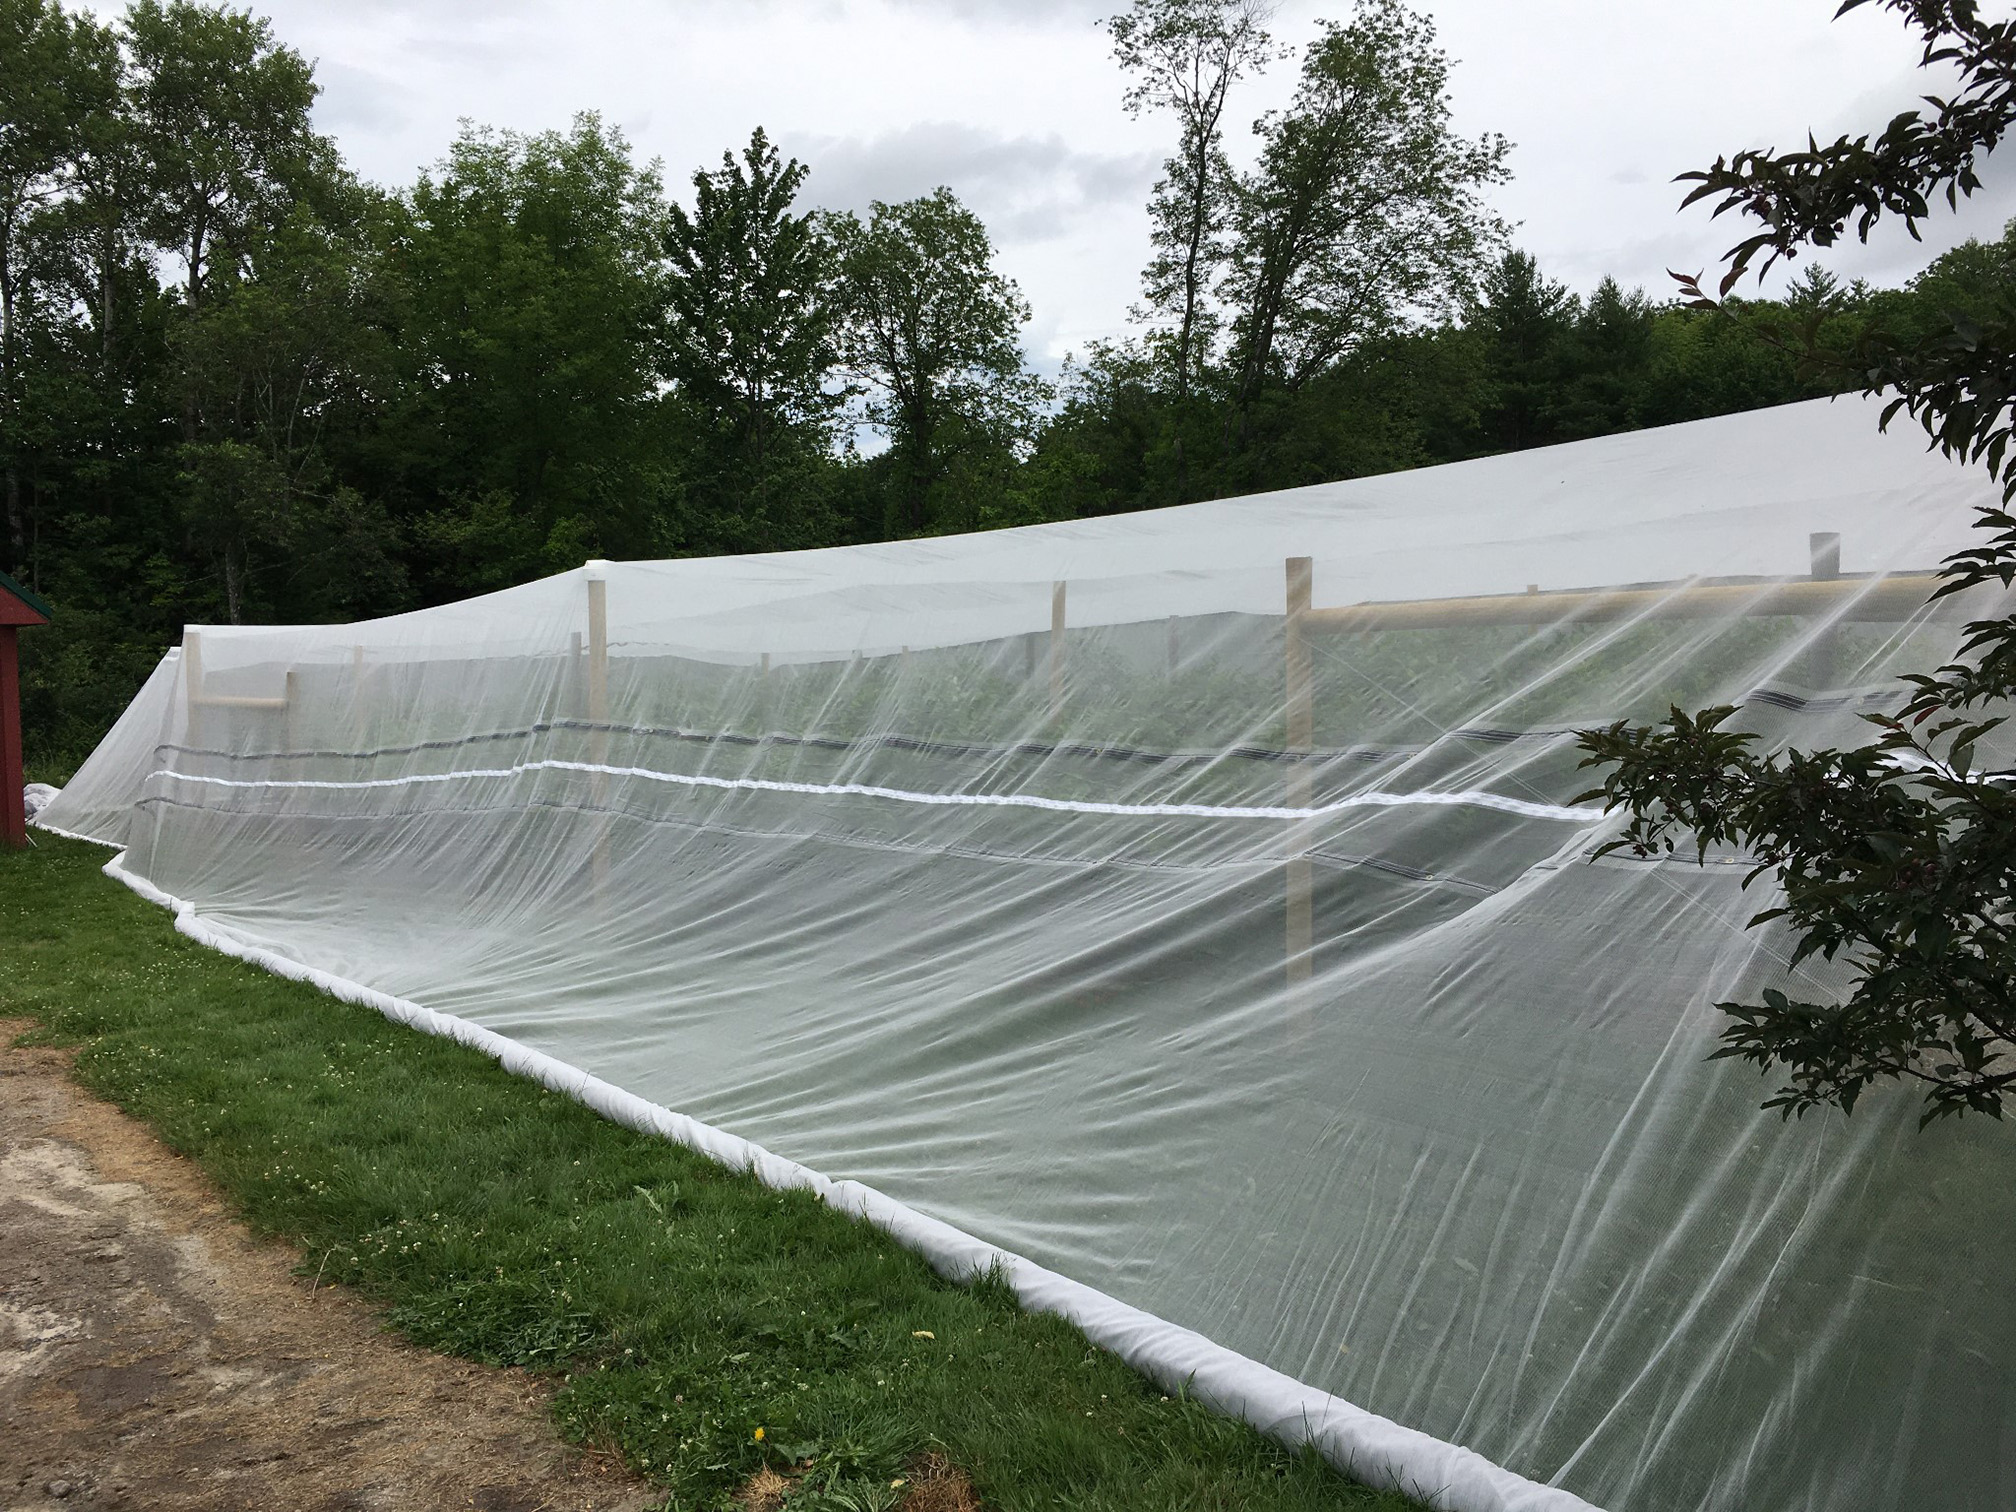 White-colored, very fine netting covers a blueberry field. The netting is supported by brown wodden posts, which can be seen through the netting. Behind the netting is a row of trees with green leaves along the edge of the farm field.